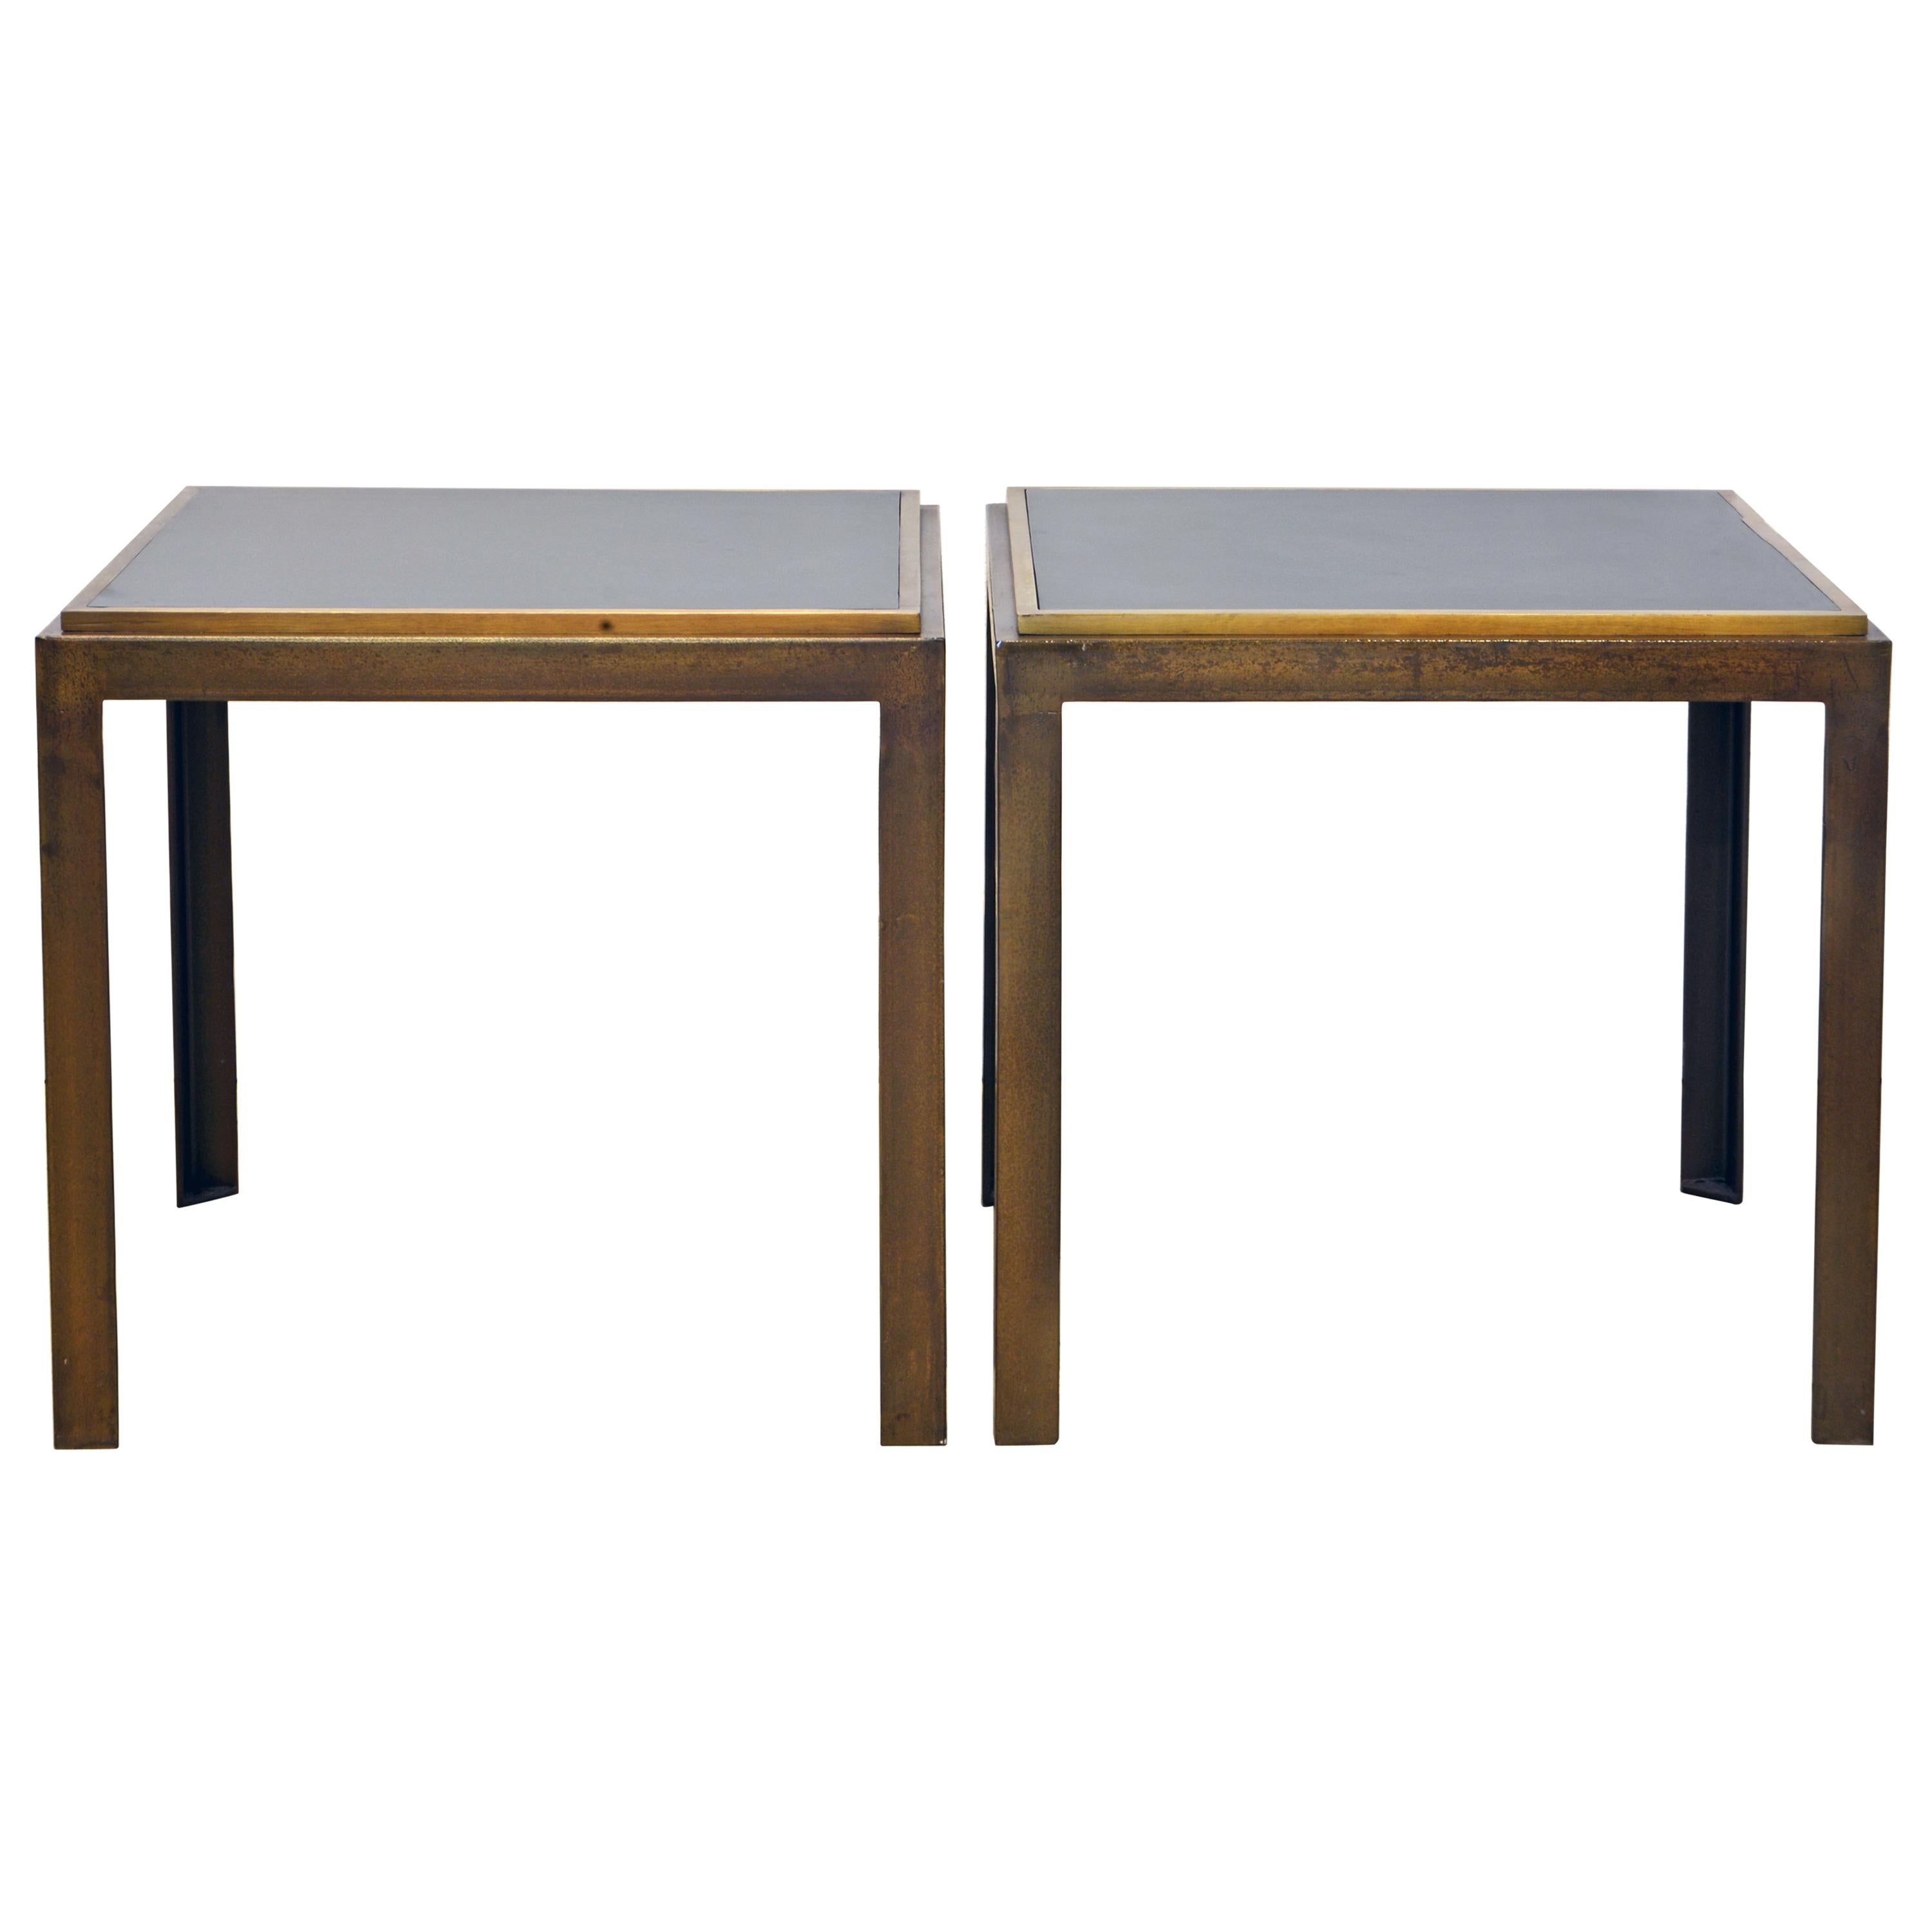 Pair of Industrial Parsons Style Lacquered Steel Minimalist End Tables 20th C